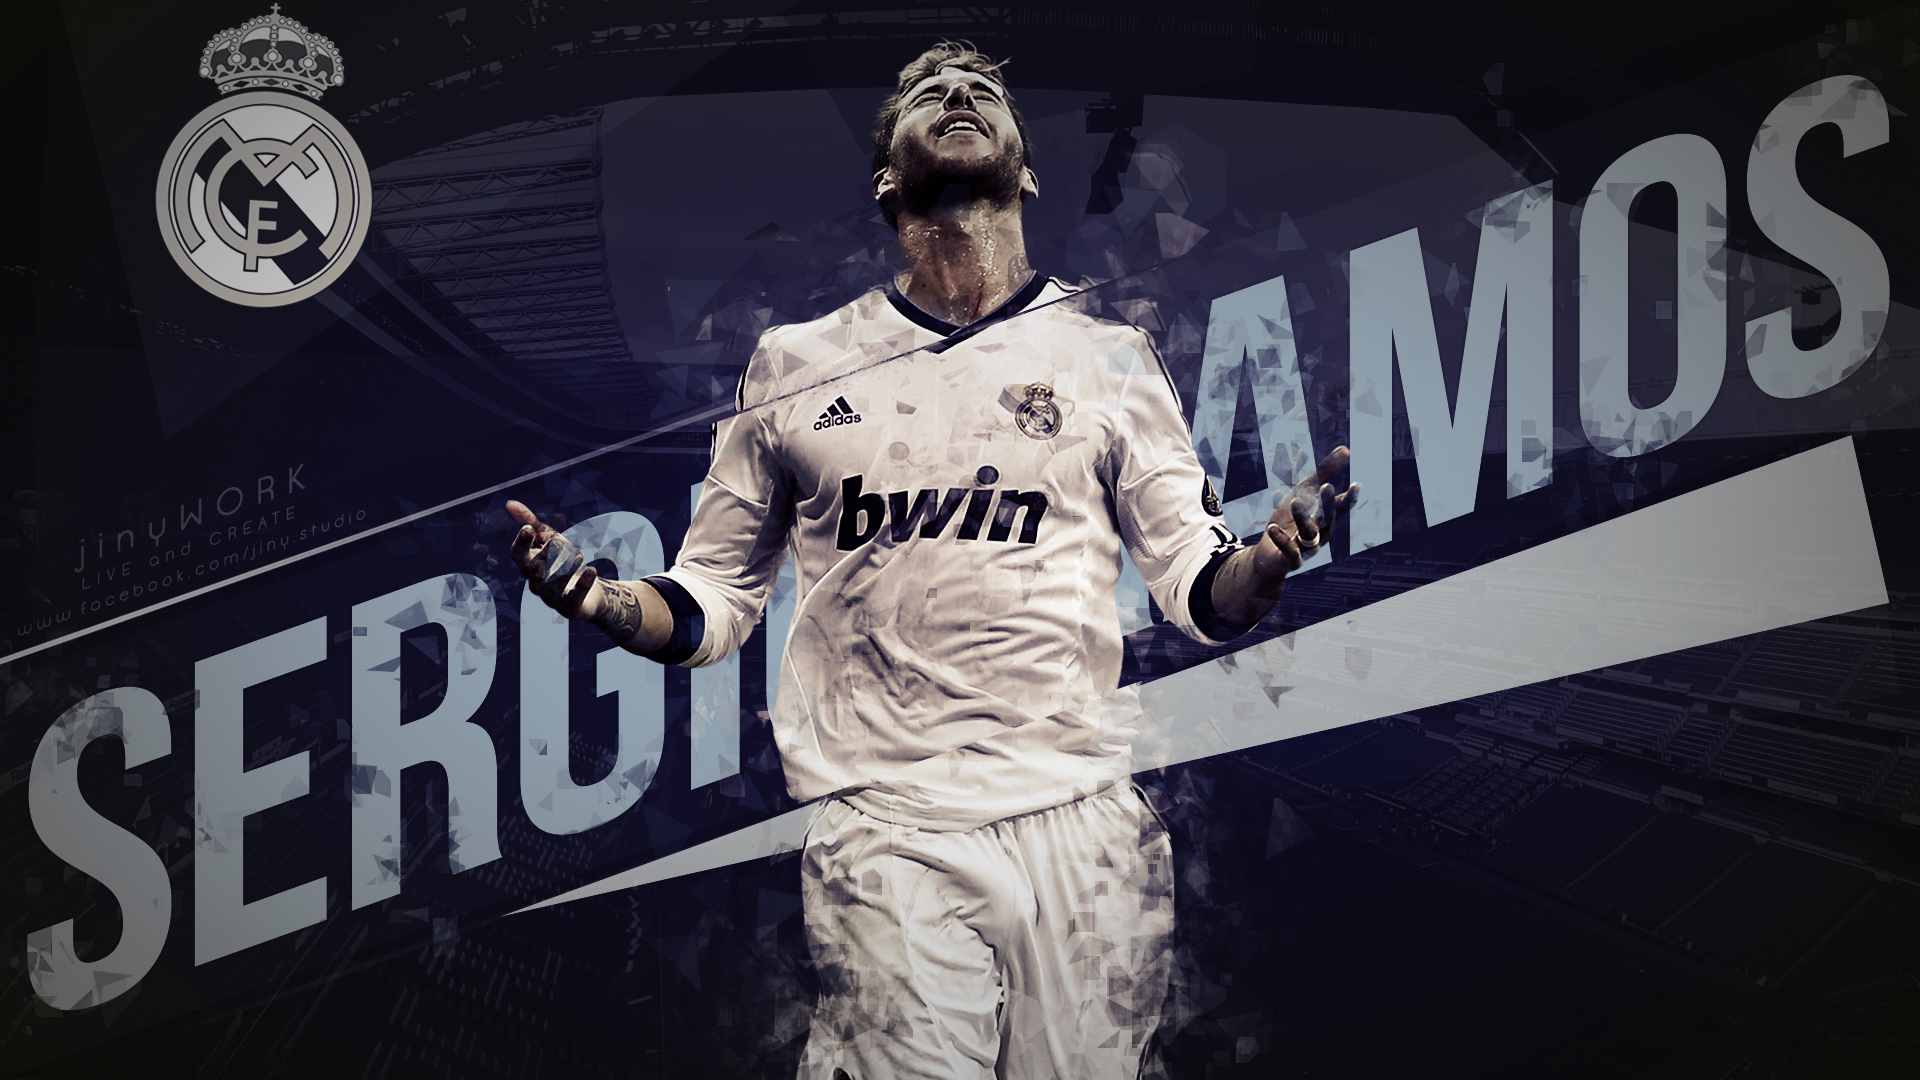 Download Sergio Ramos wallpaper for mobile phone, free Sergio Ramos HD picture